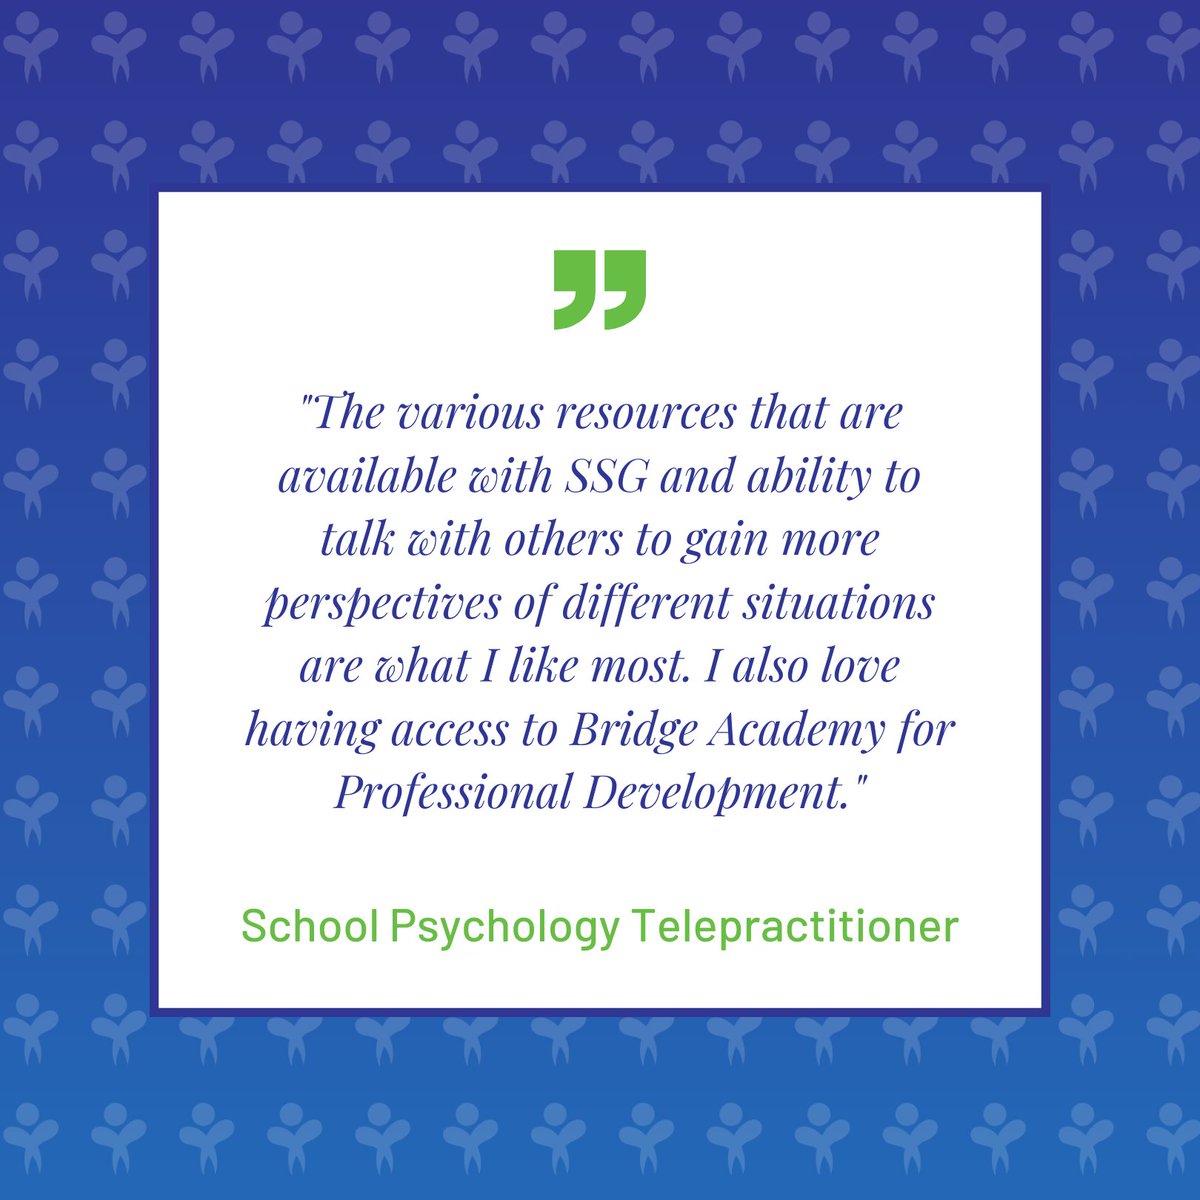 We love receiving feedback from our employees! Check out this testimonial from one of our School Psychology Telepractitioners.

...
#EmployeeReview #EmployeeTestimonial
#Review #Testimonial
#TransformingLivesTogether